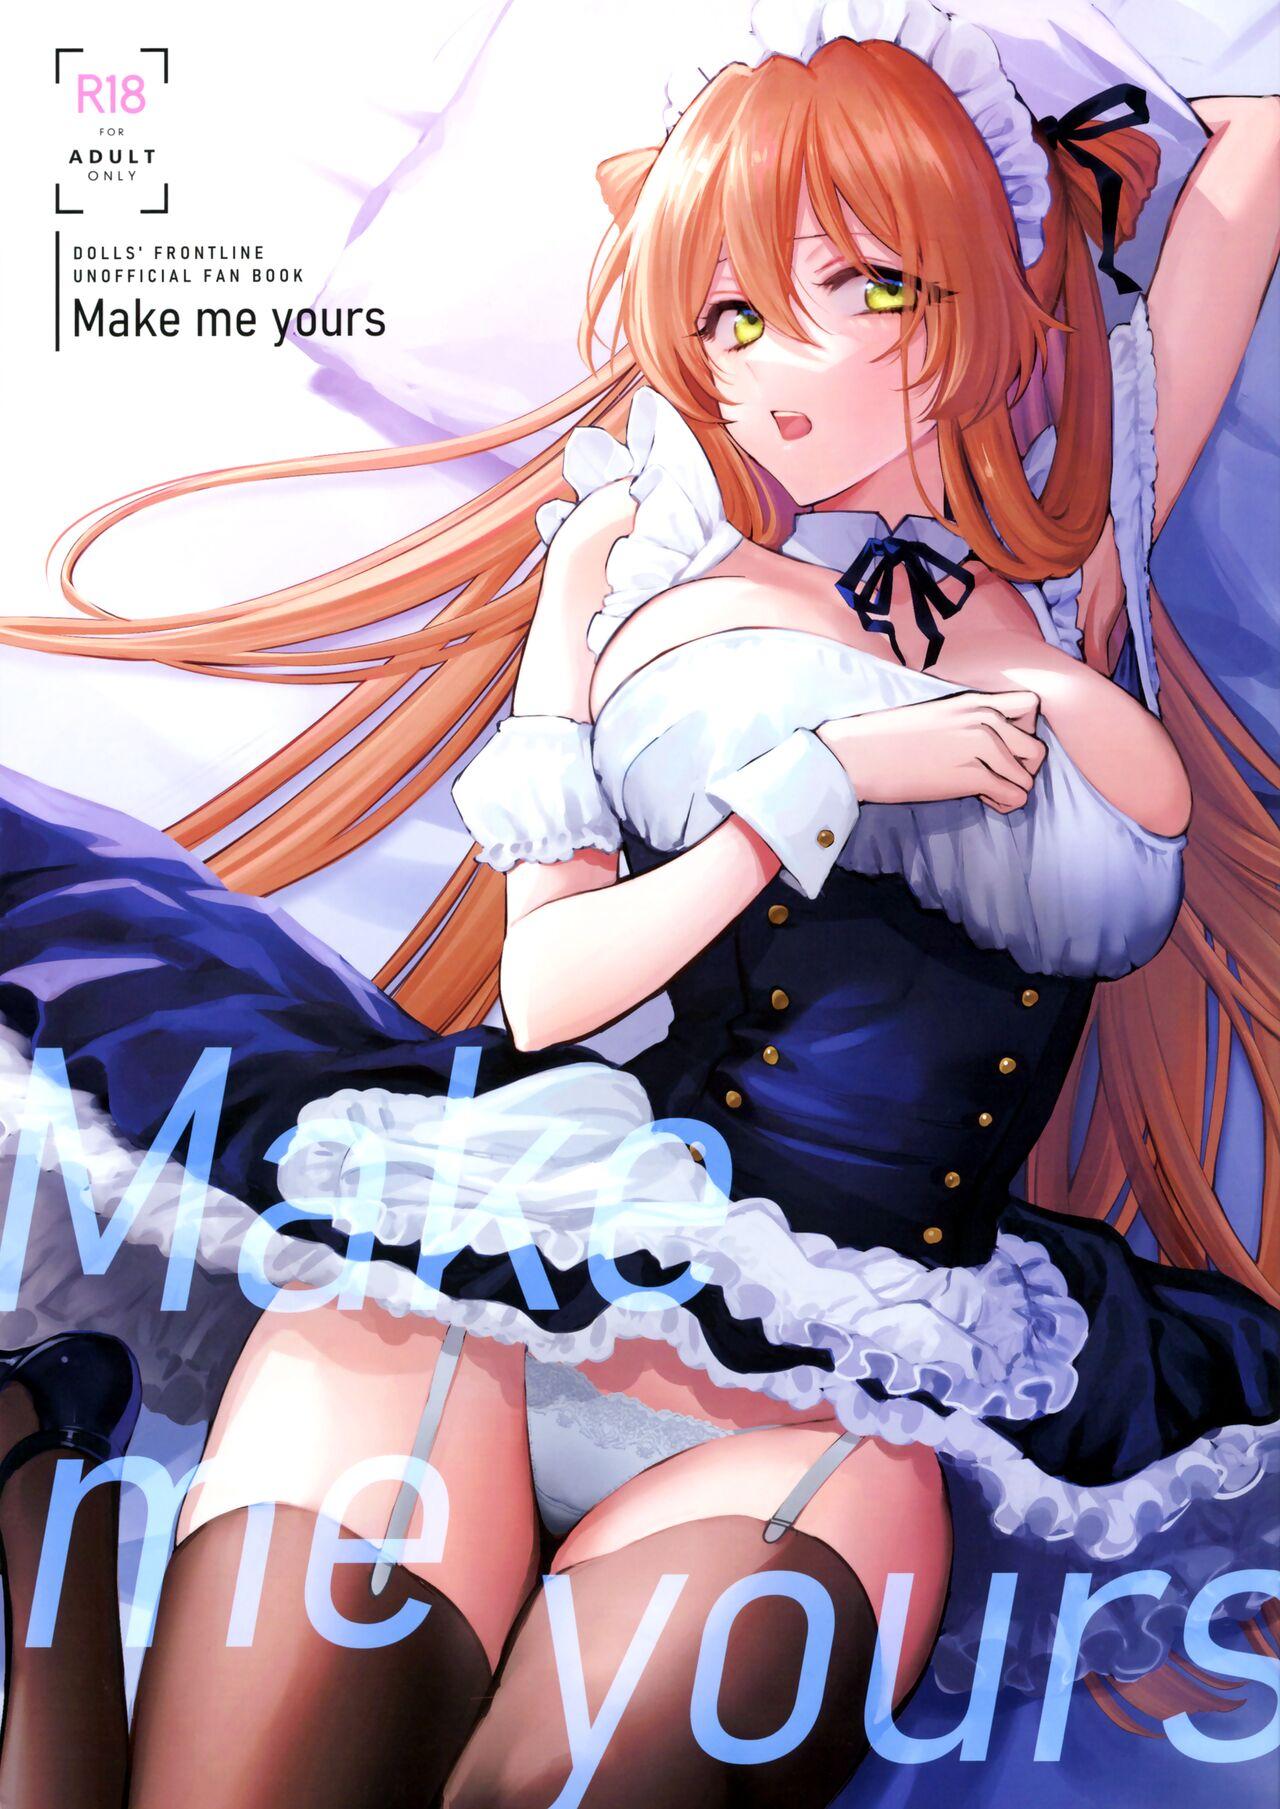 Lady Make me Yours - Girls frontline Hard Cock - Page 1